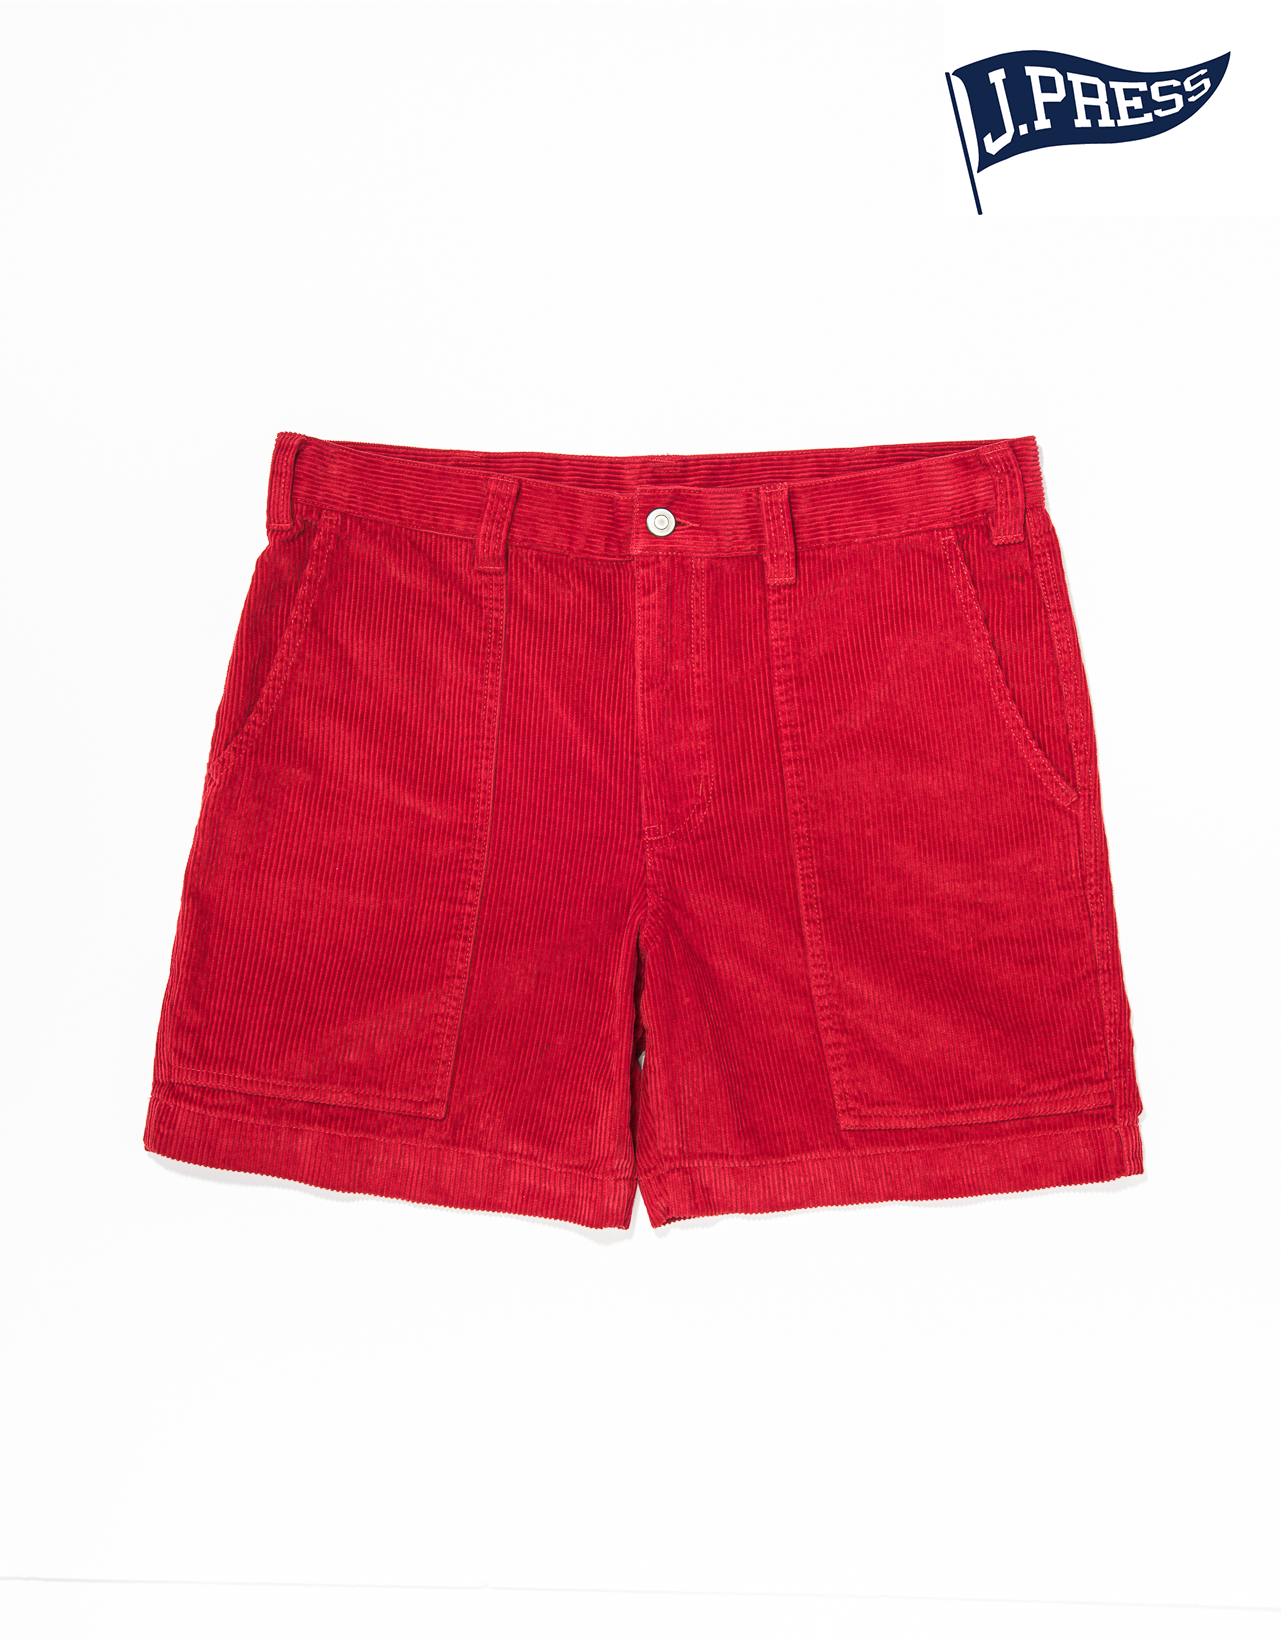 CORDUROY SHORTS - RED